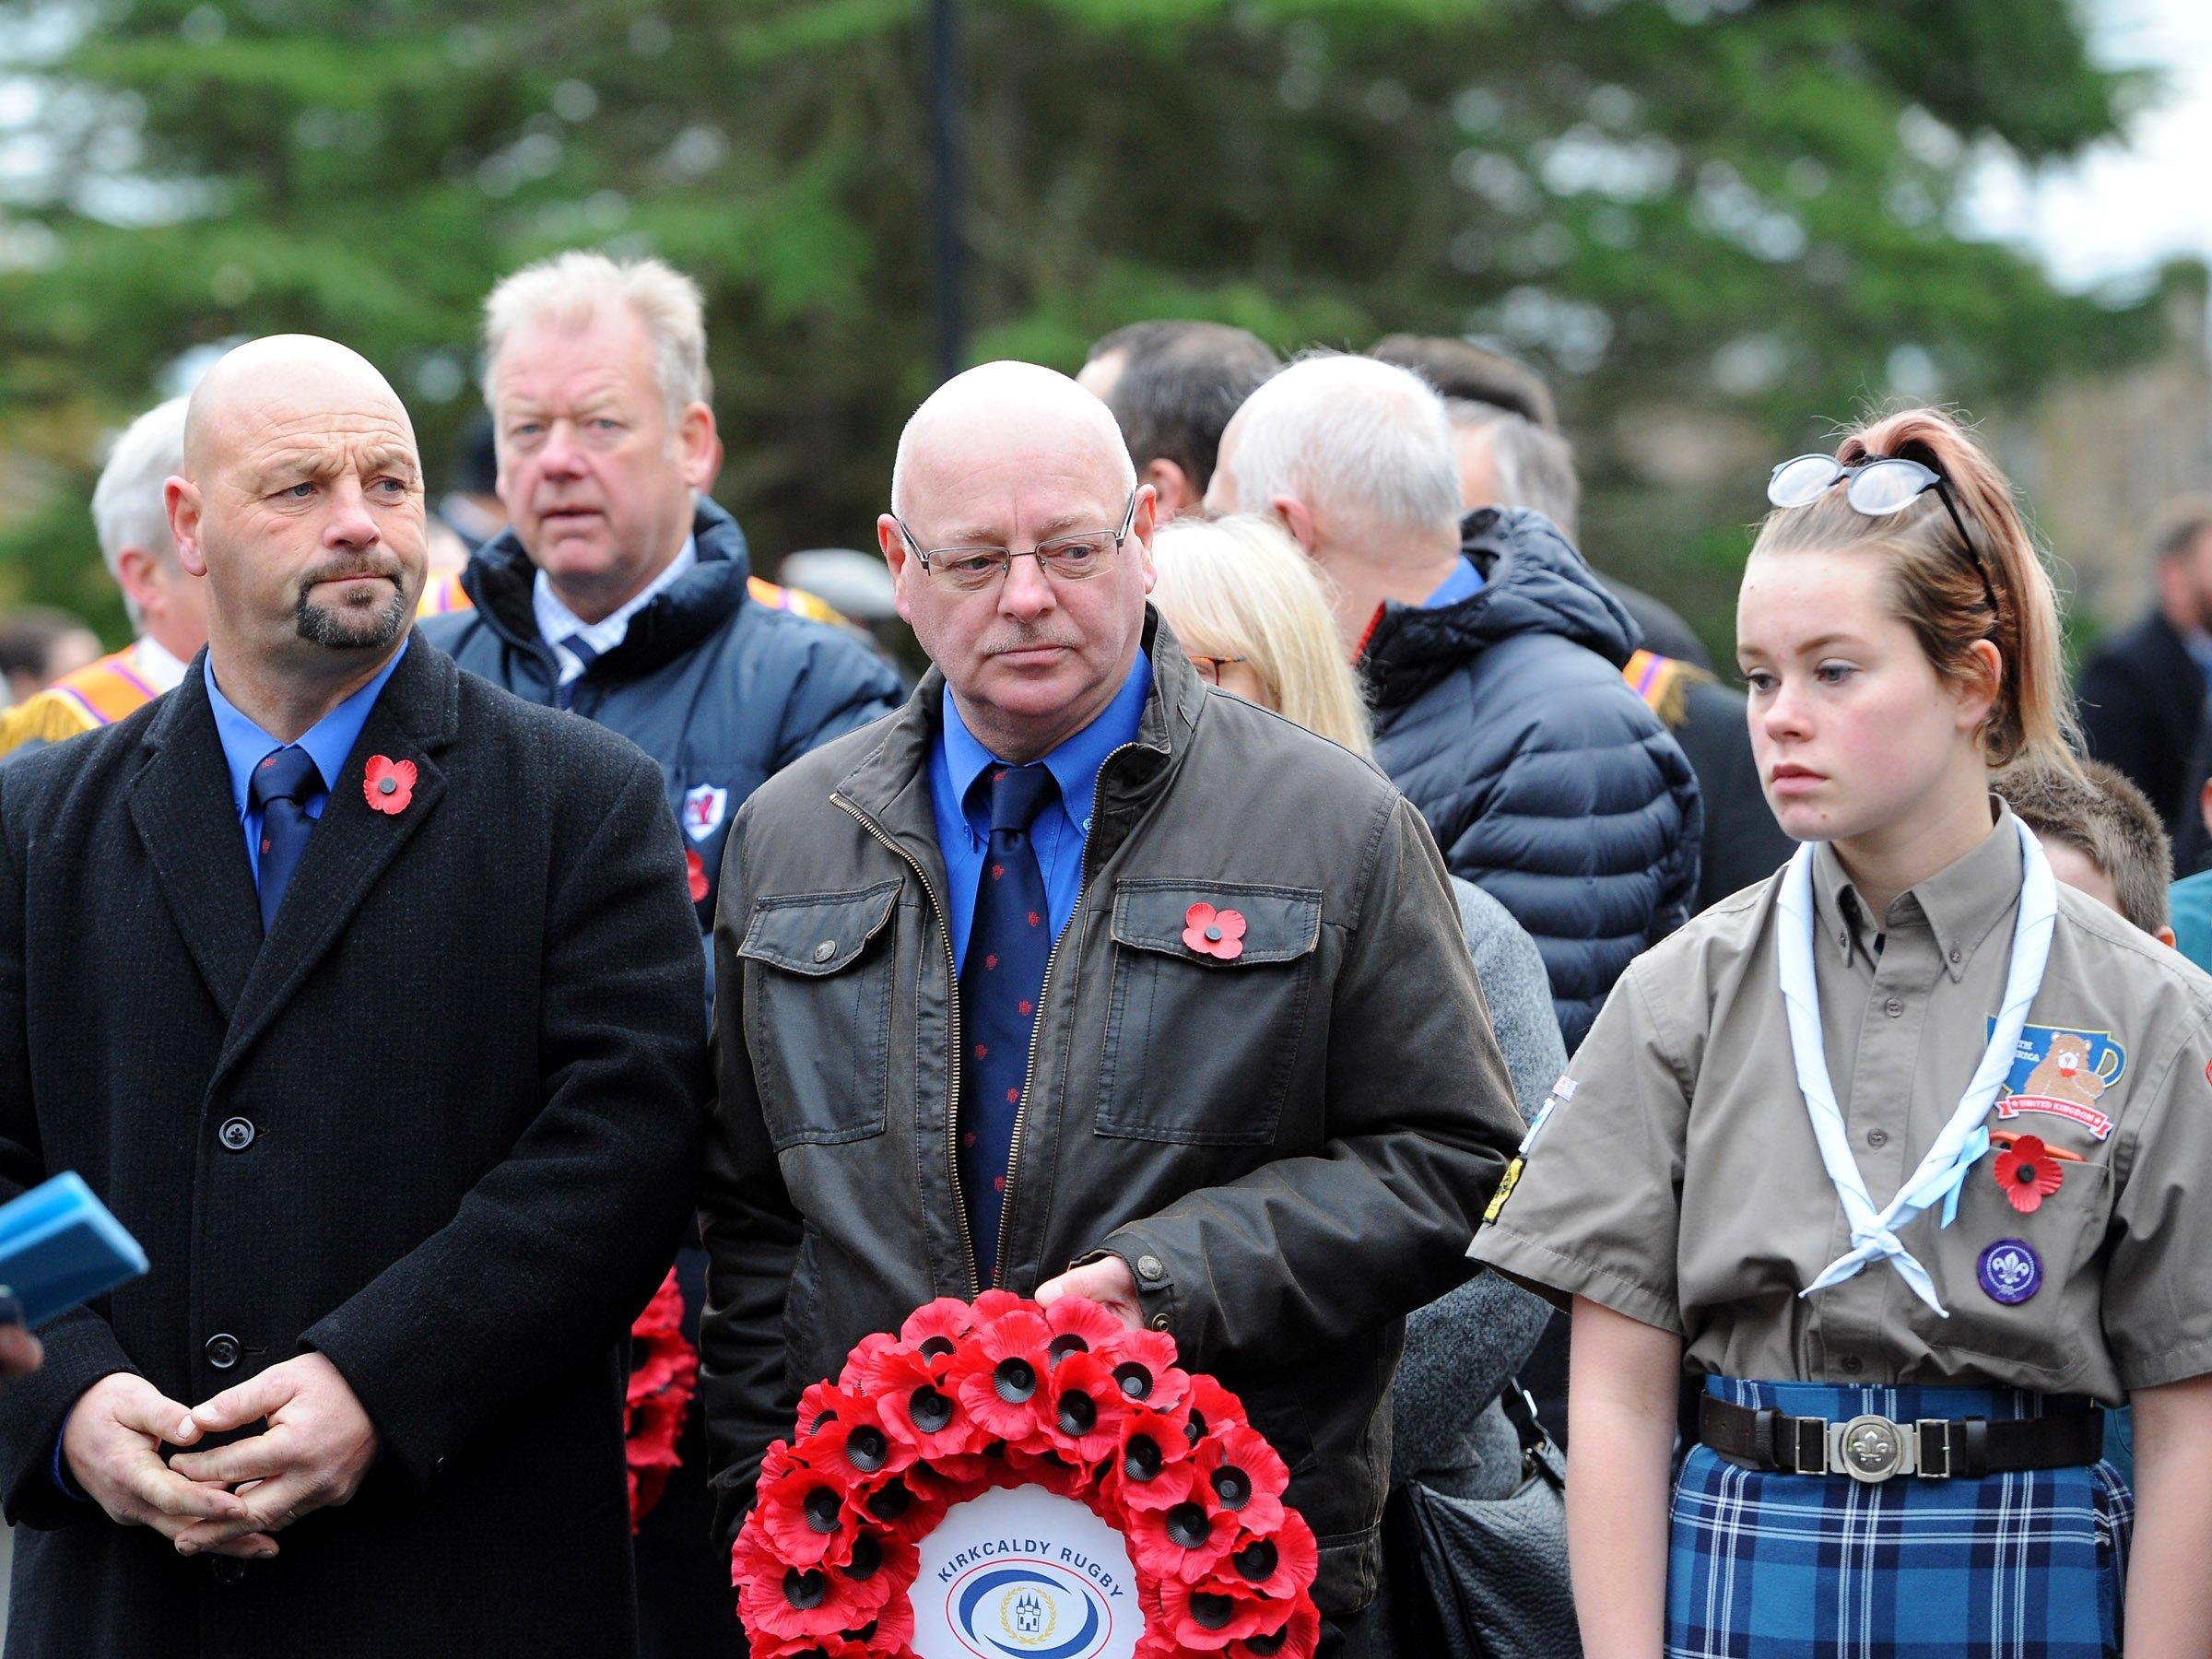 Remembrance Sunday Service, Memorial Gardens, Kirkcaldy. Picture by Walter Neilson/Fife Photo Agency.